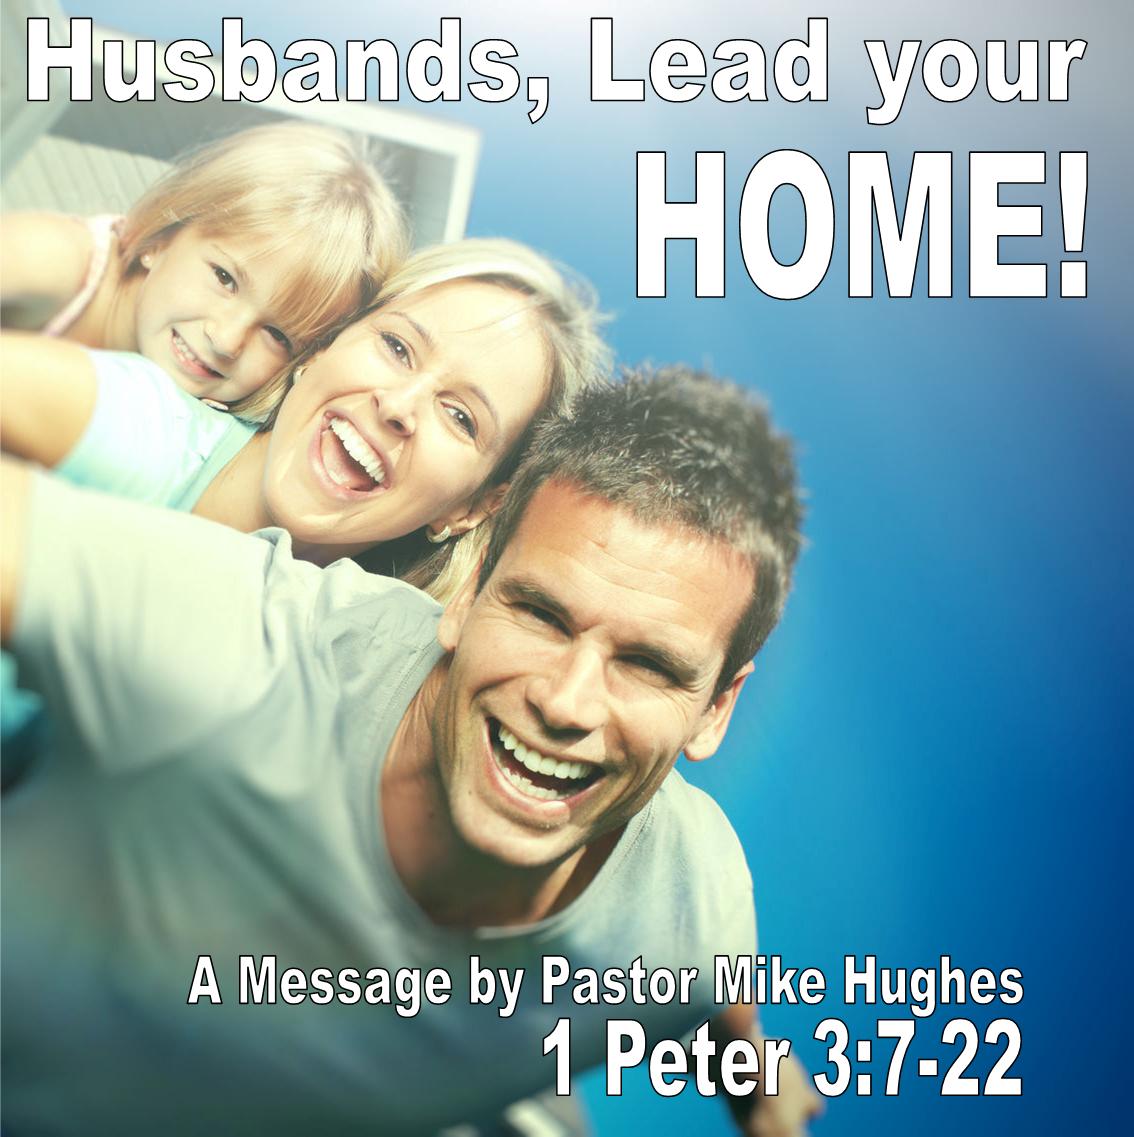 1 Peter 3: 7-22 A Study on Marriage: Husbands, Lead Your Home!